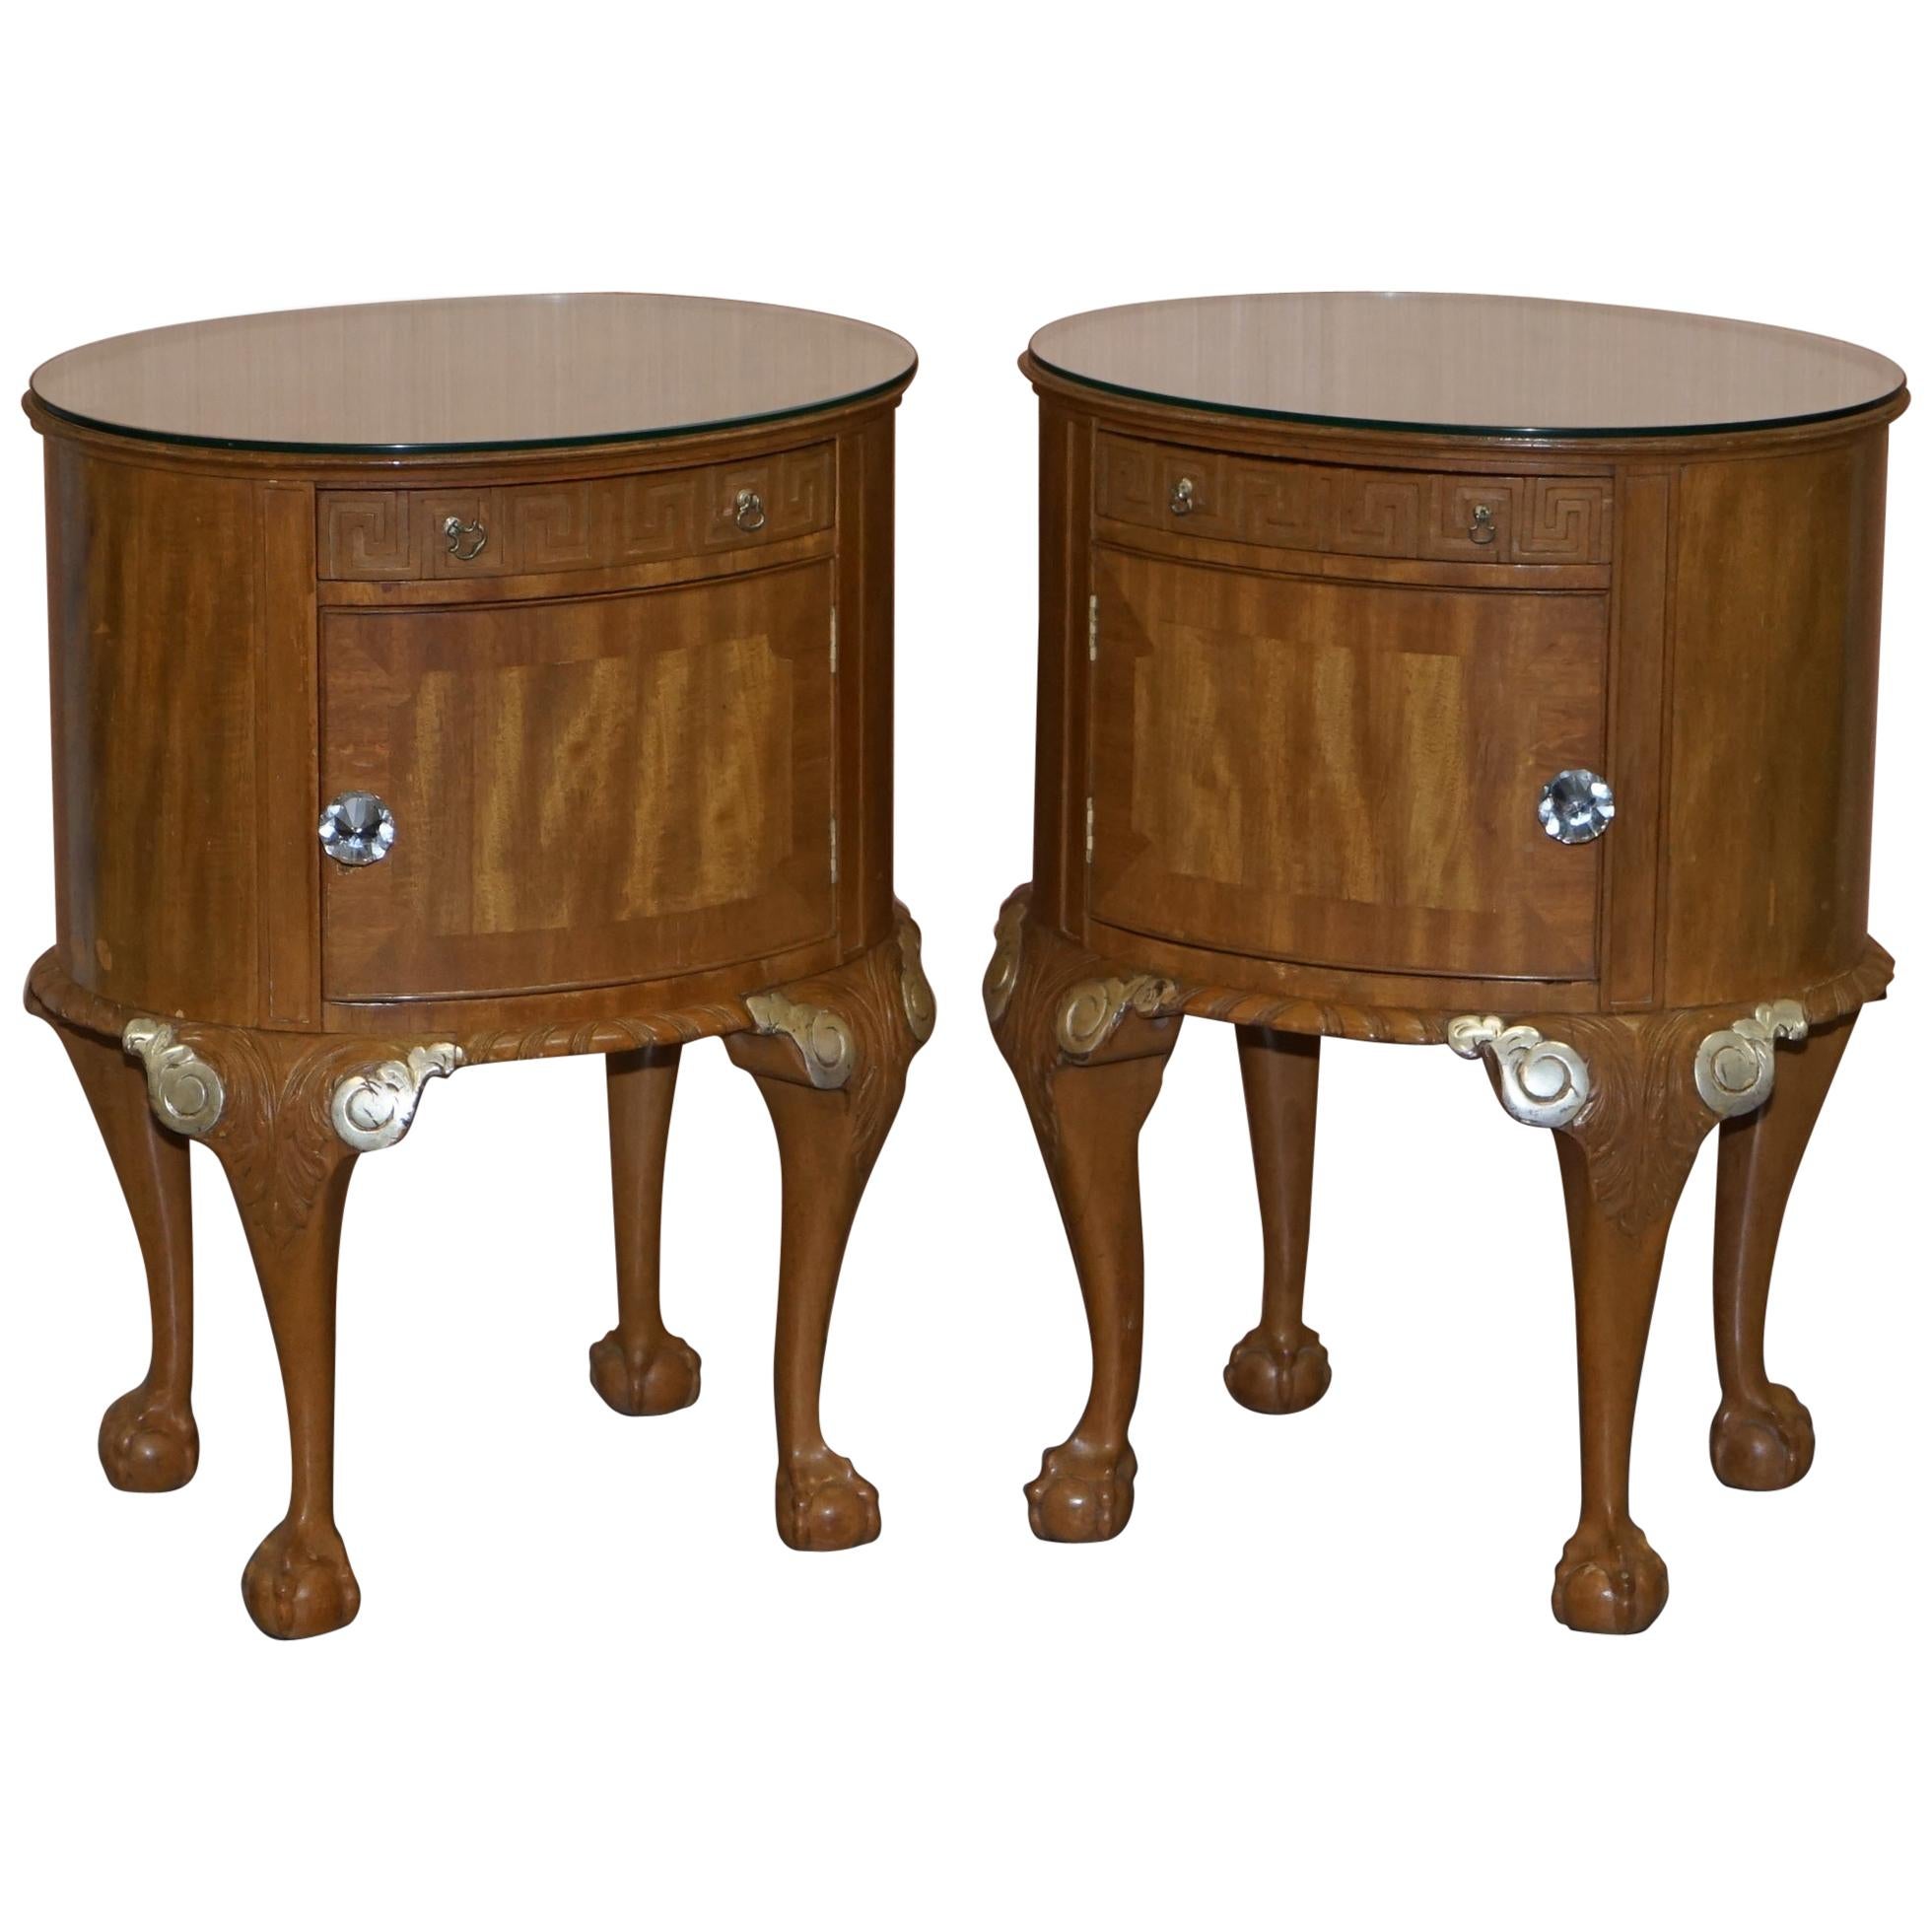 Pair of Stunning Gillows Bedside Tables Ornate Claw and Ball Feet Part of Suite